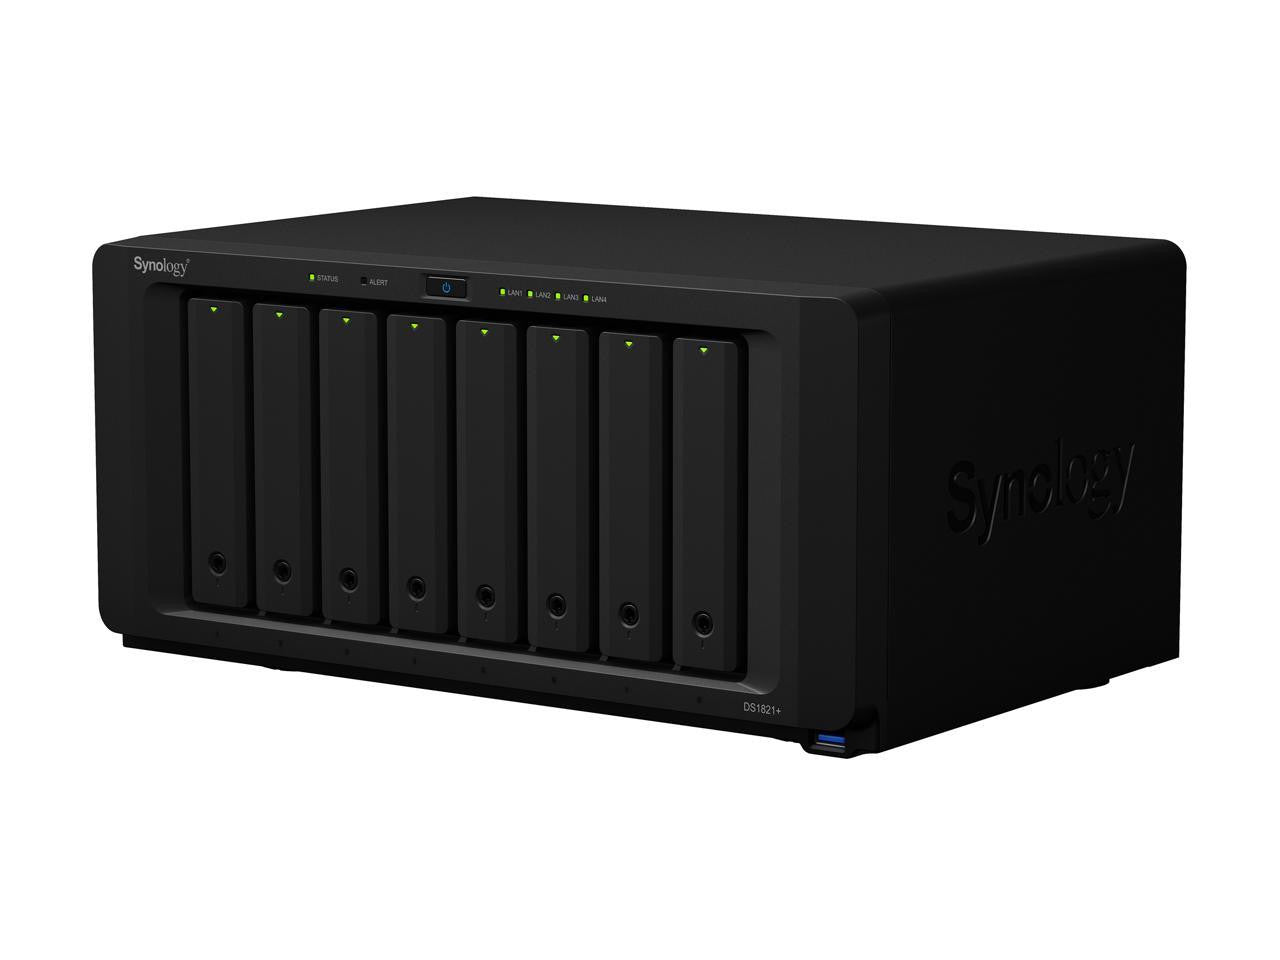 Synology DS1821+ 8-BAY DiskStation with 8GB Synology RAM and 96TB (8x12TB) Synology Enterprise HAT5300 Drives Fully Assembled and Tested